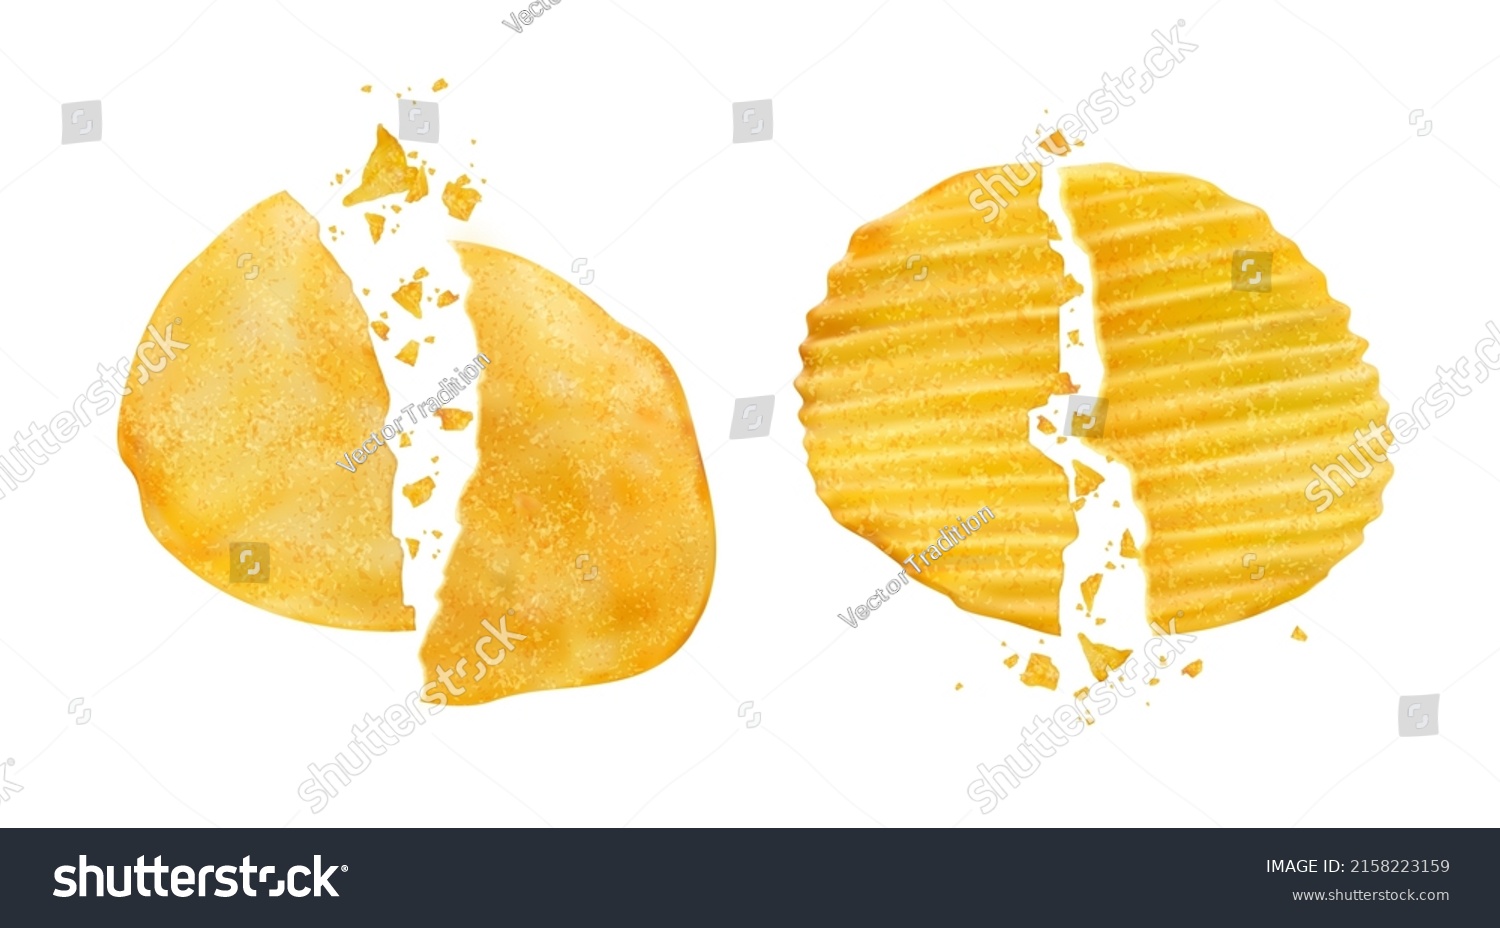 Cracked and broken potato chips with crumbs. Realistic vector crispy snack chips pieces separated on two parts. Isolated 3d crushed crunchy junk food, delicious vegetable crisp meal, fast food #2158223159